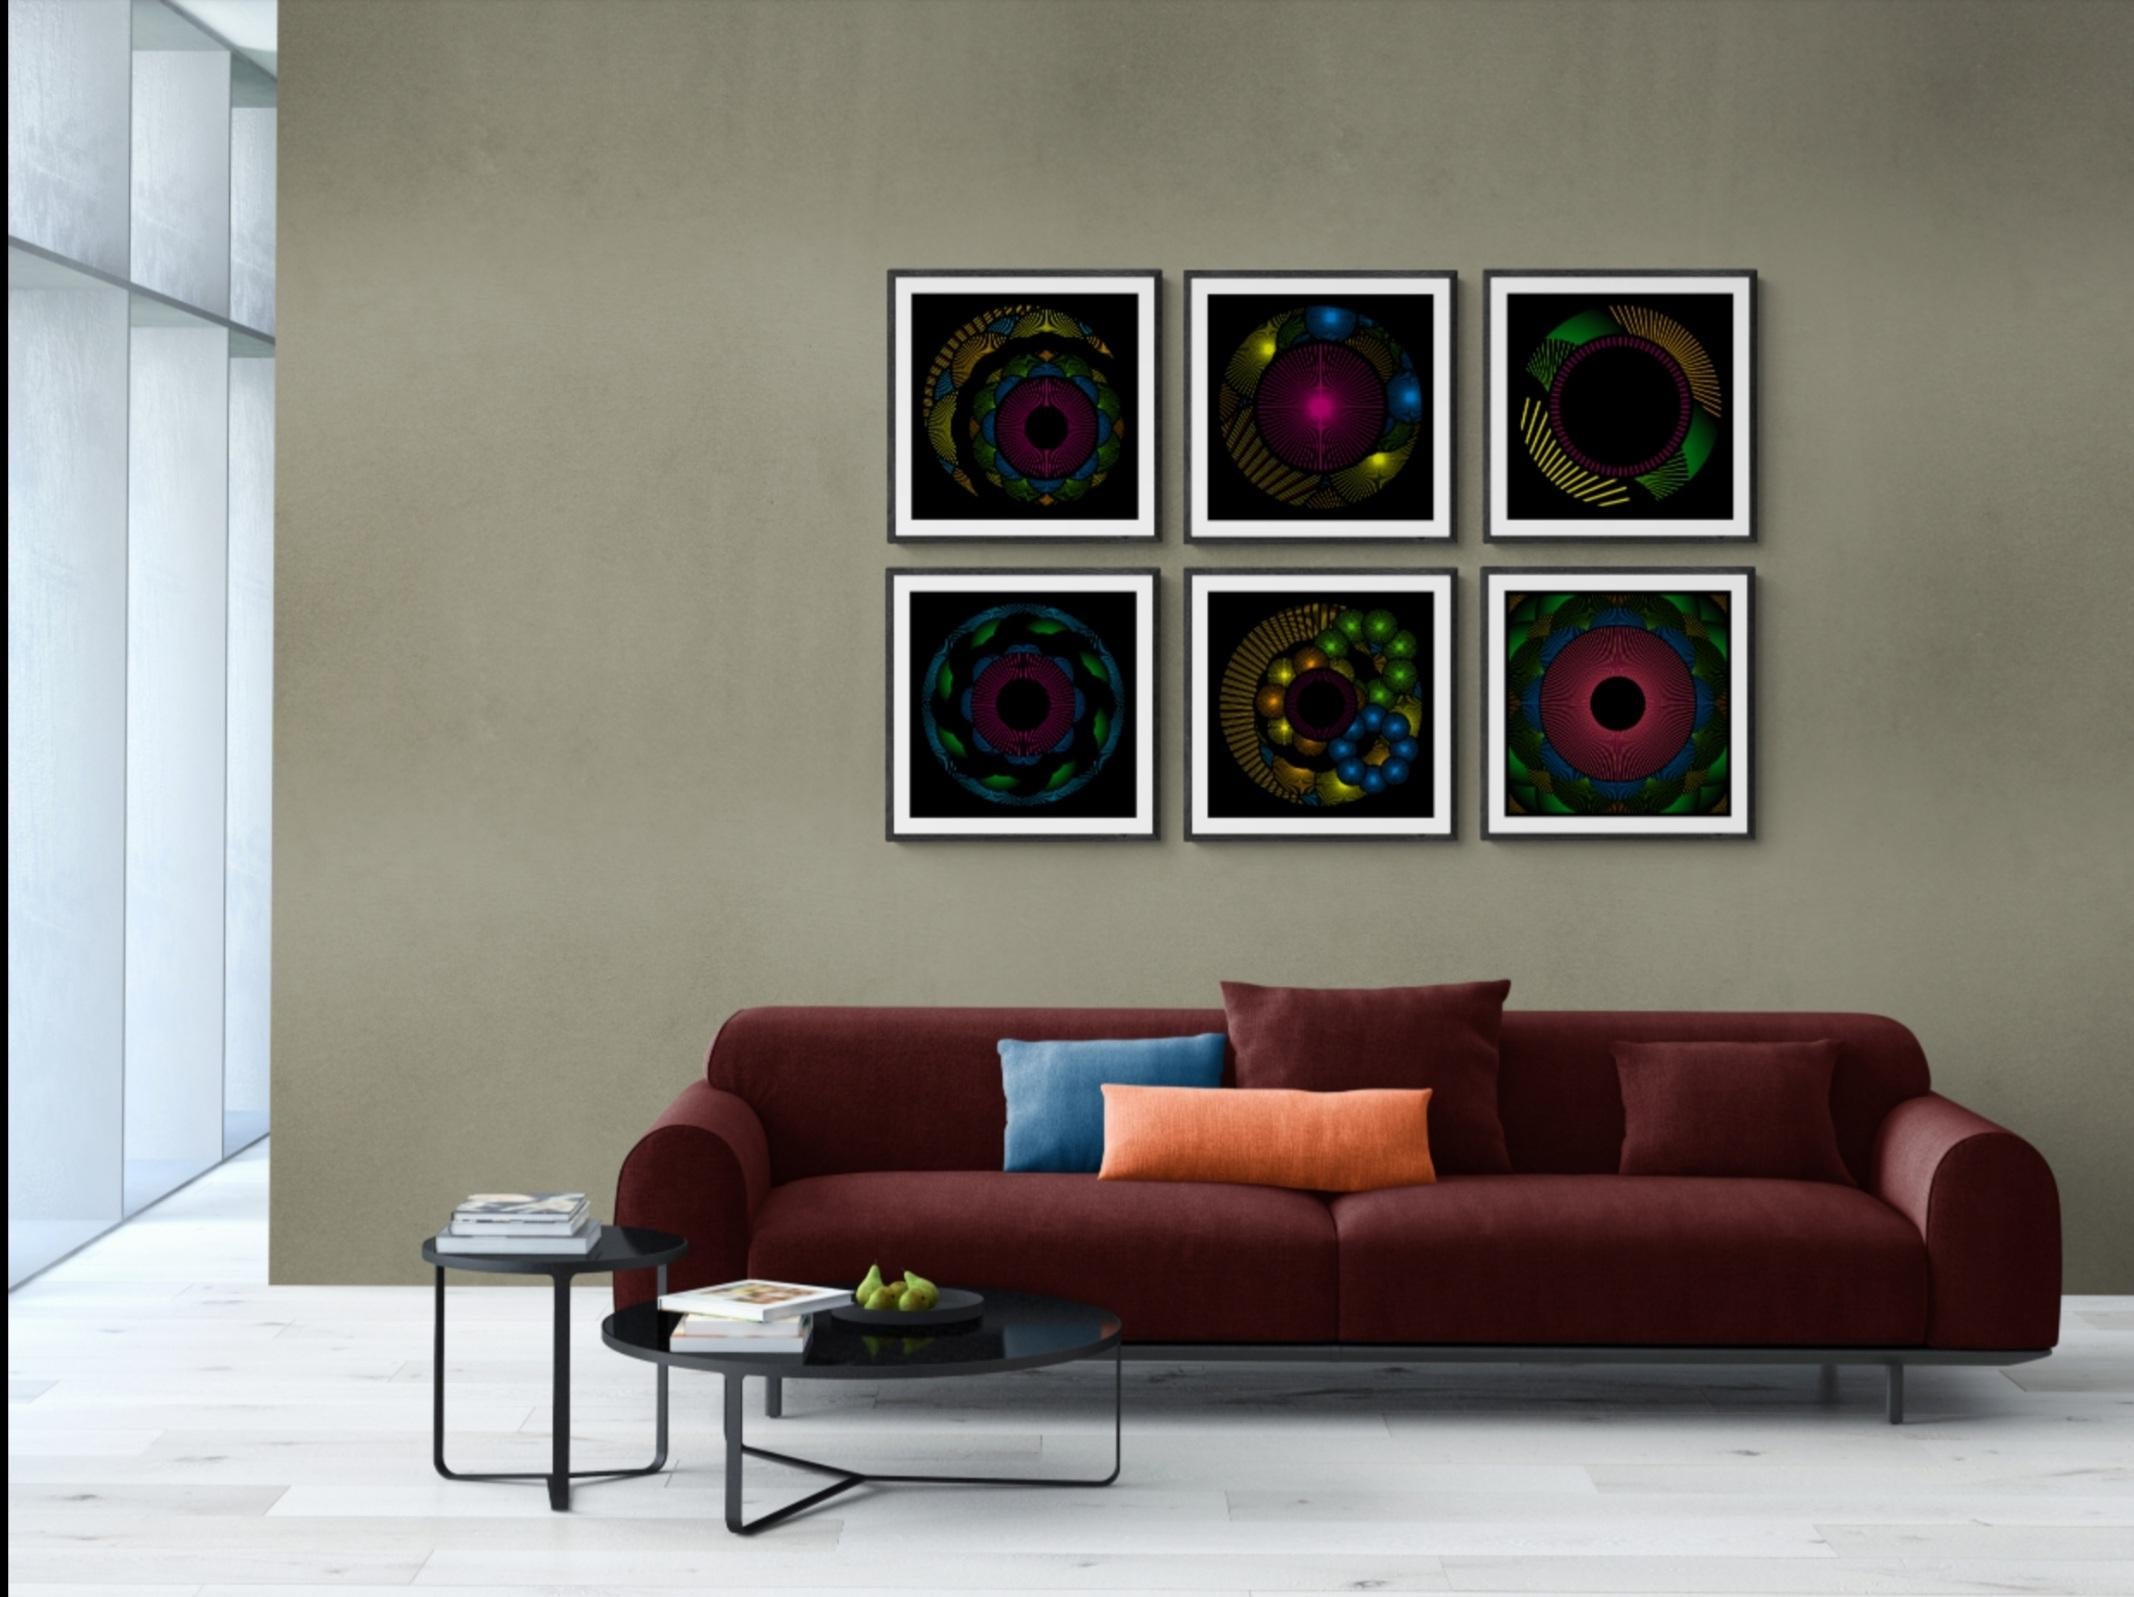 Nebulosa 9 - Abstract Geometric Print by Julio Campos